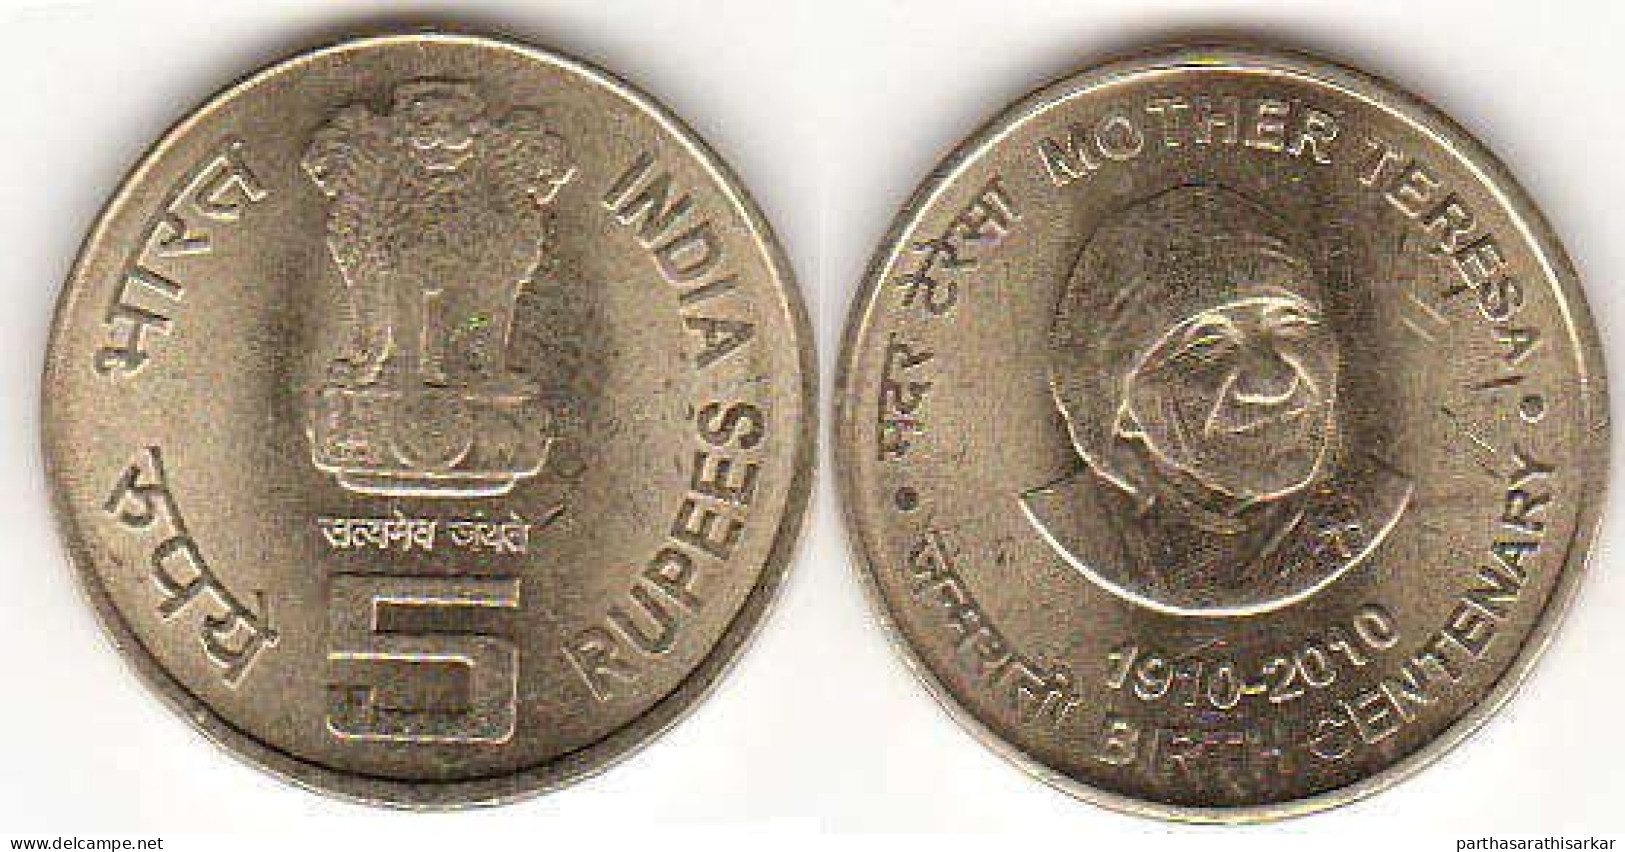 INDIA 2010 100 YEARS SINCE THE BIRTH OF MOTHER THERESA 5 RUPEES COIN UNC - Inde